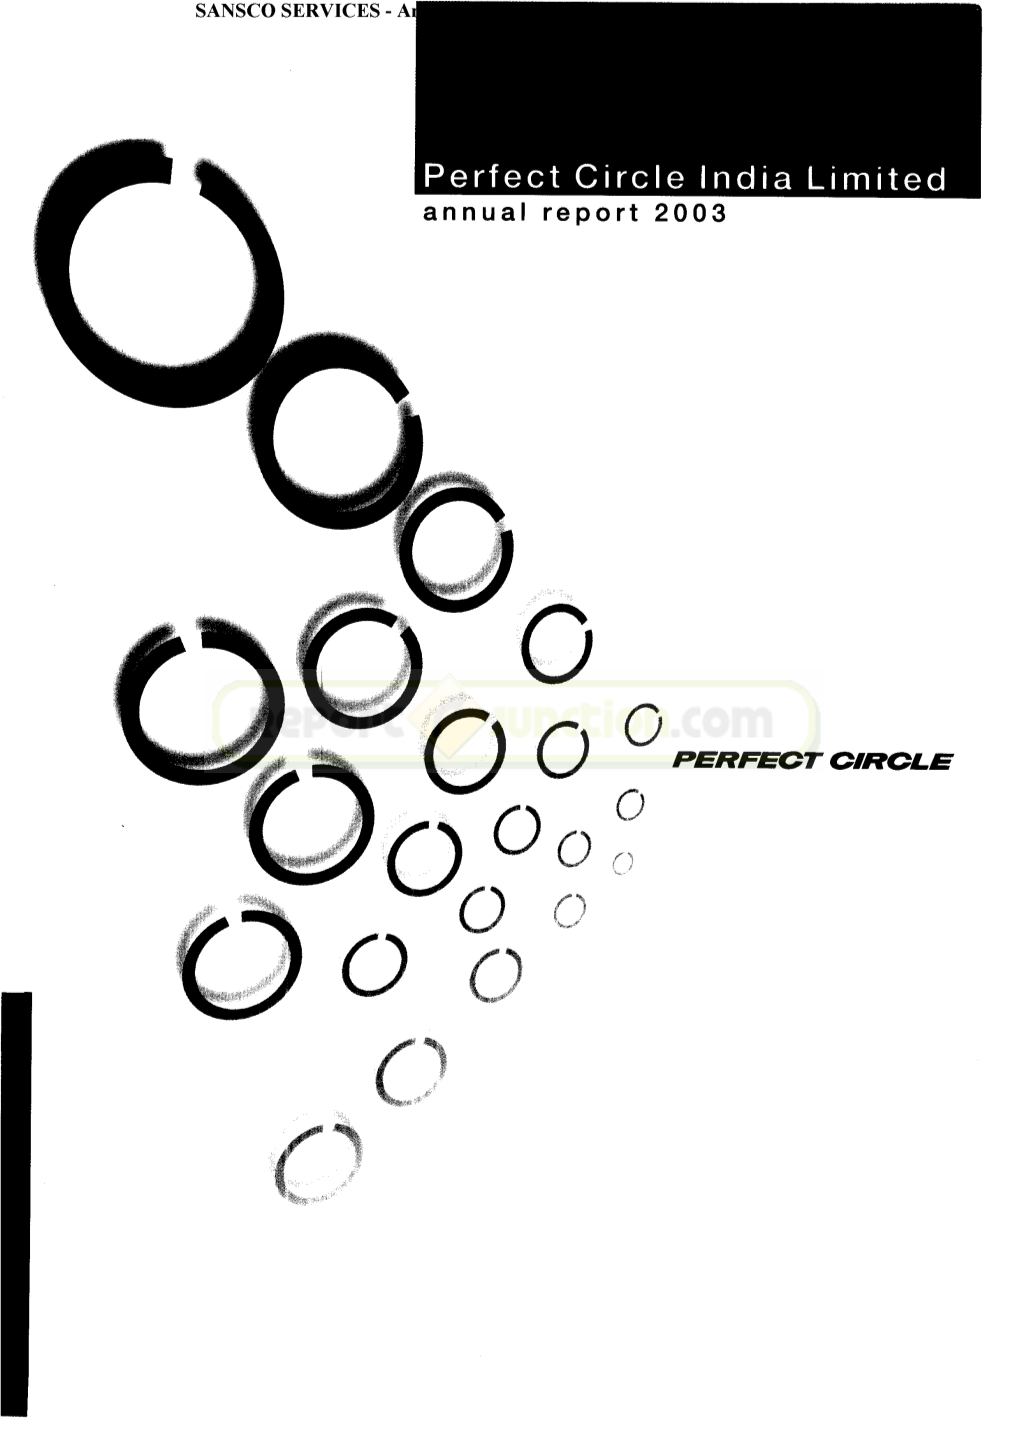 Perfect Circle India Limited Annual Report 2003